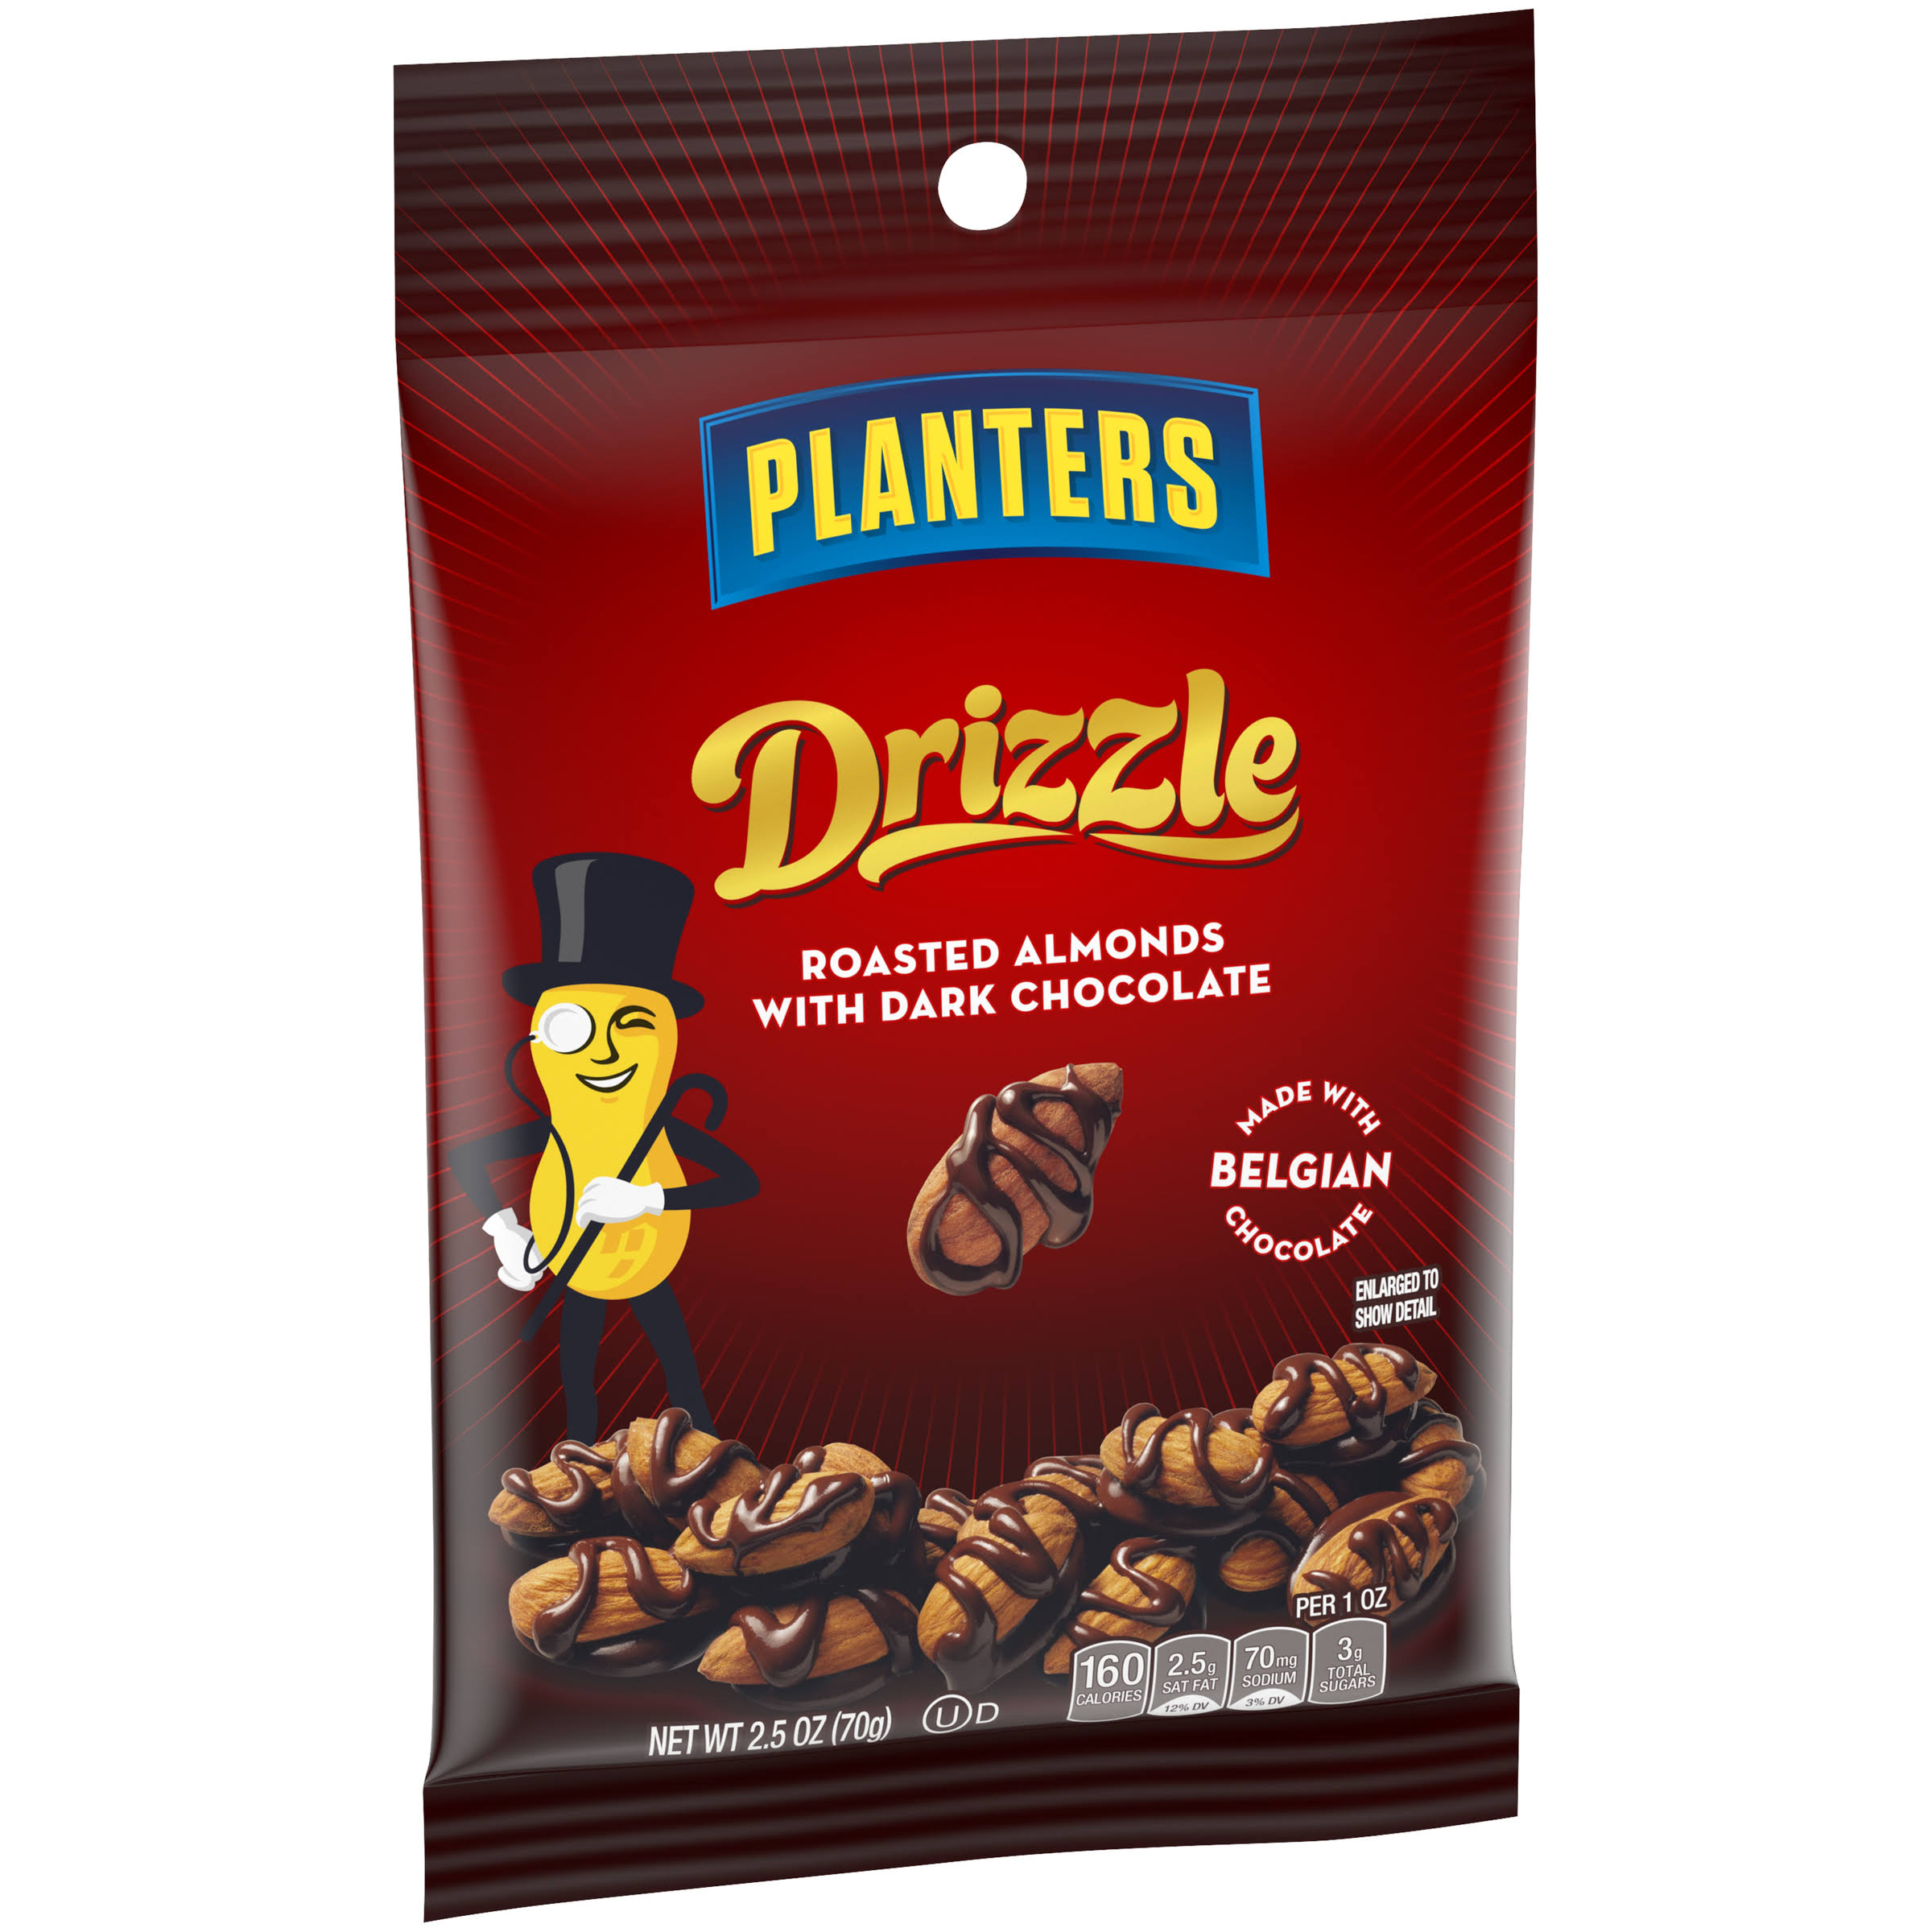 Planters Almonds, Roasted, with Dark Chocolate, Drizzle - 2.5 oz